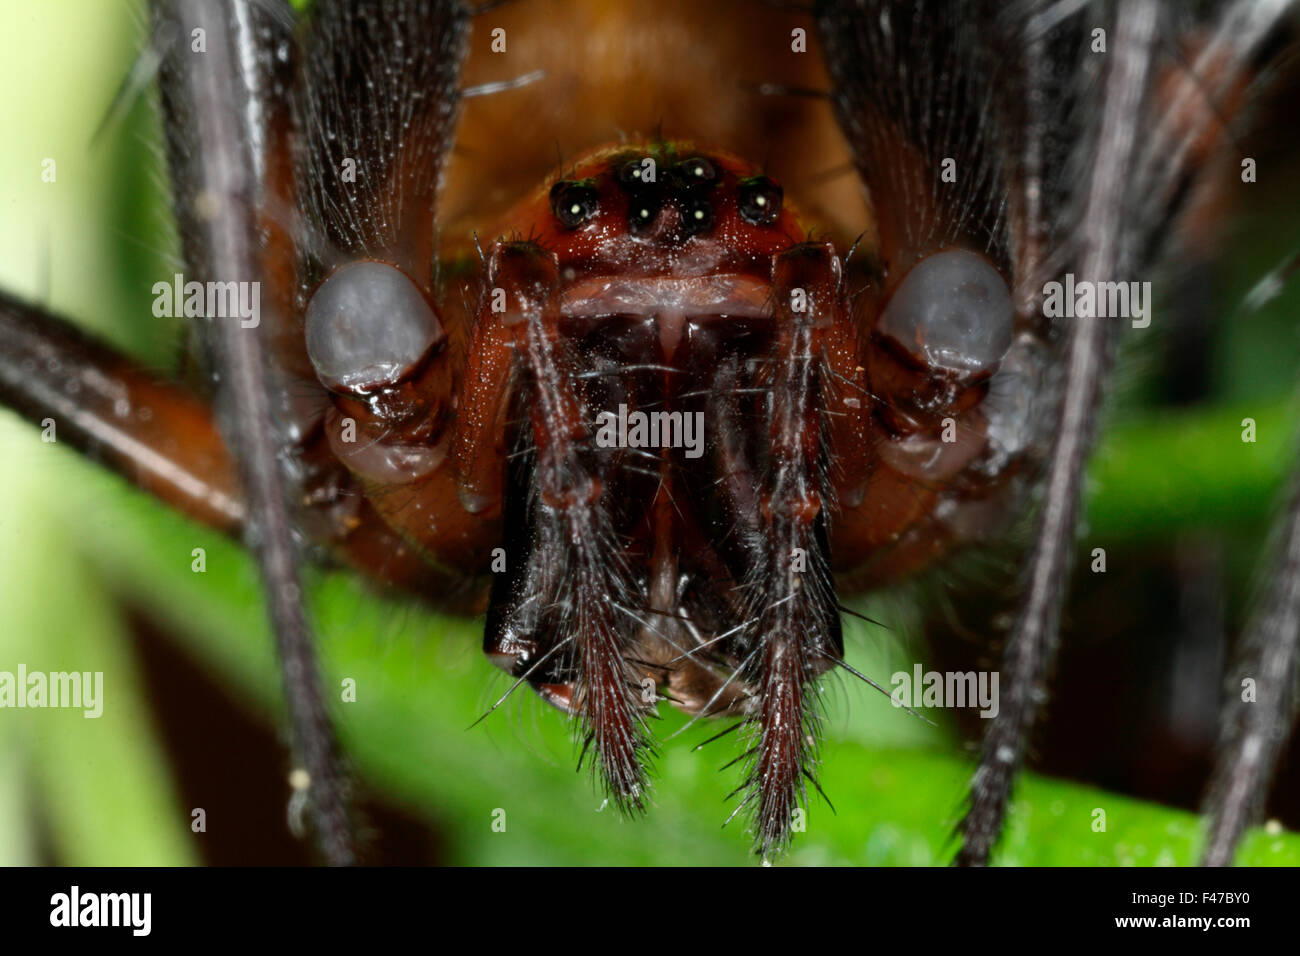 A European cave spider, close-up, Sweden. Stock Photo